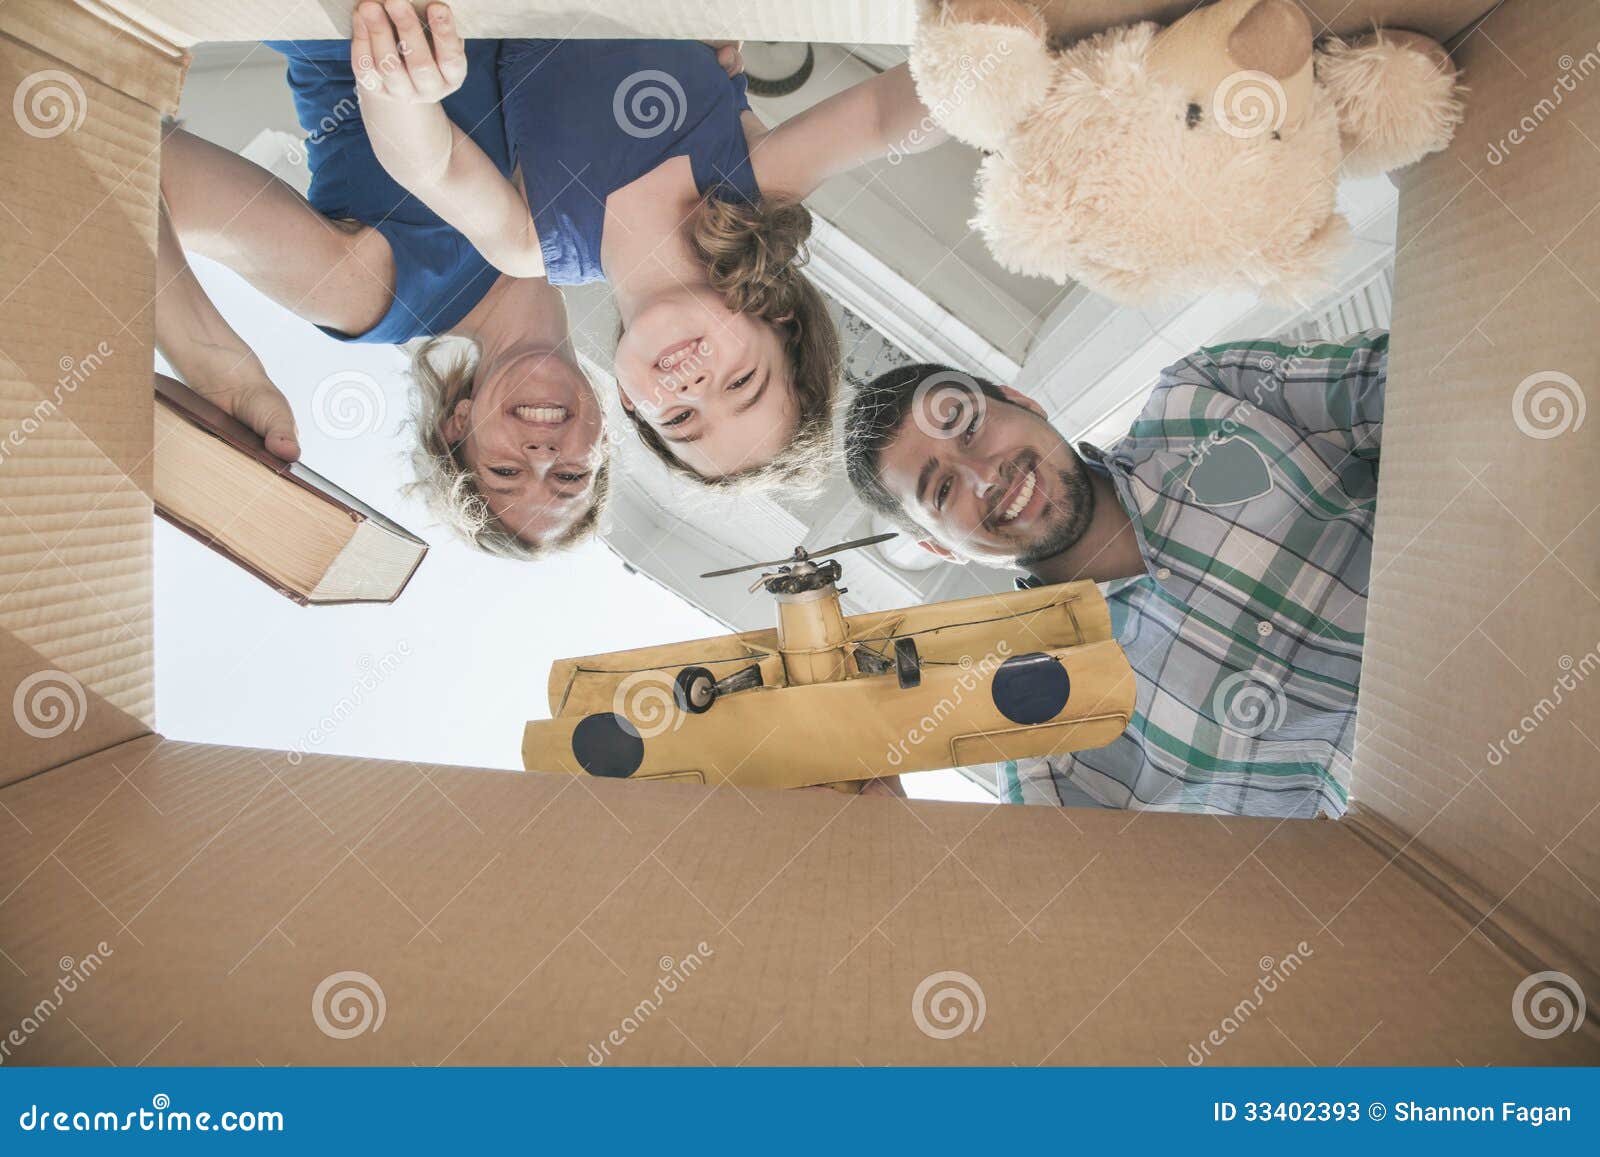 smiling family looking into a cardboard box, view from directly under